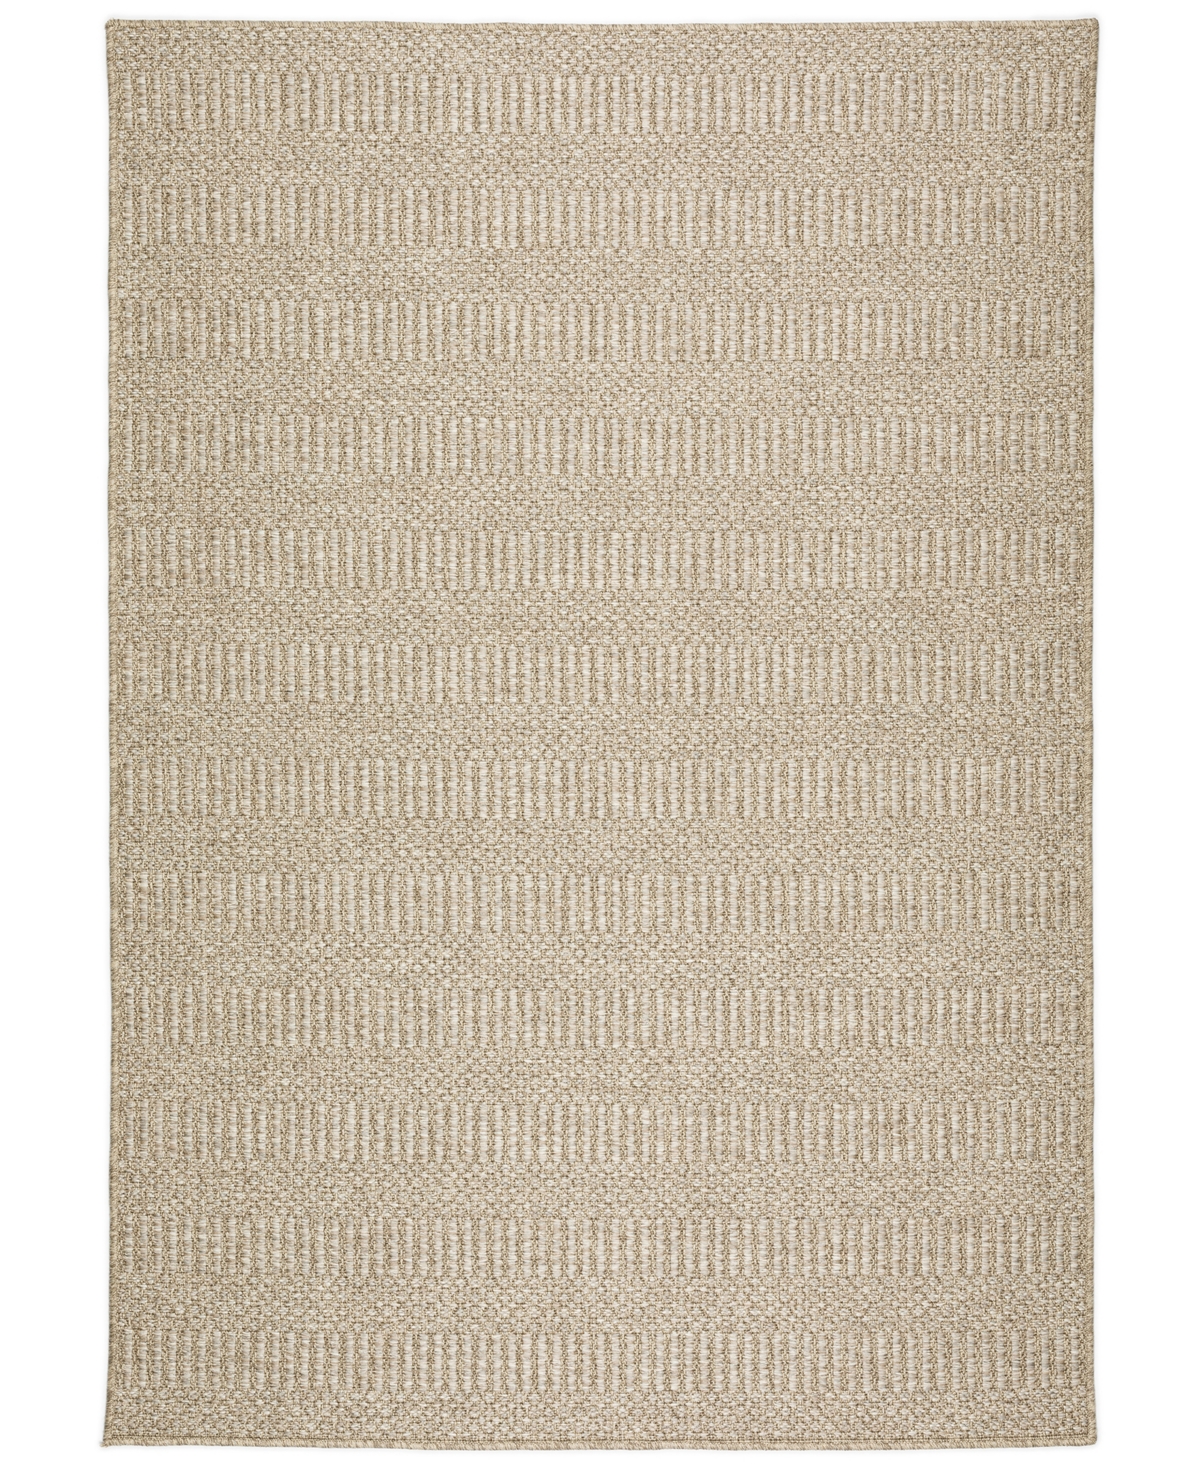 D Style Nusa Outdoor Nsa4 1'8" X 2'6" Area Rug In Beige